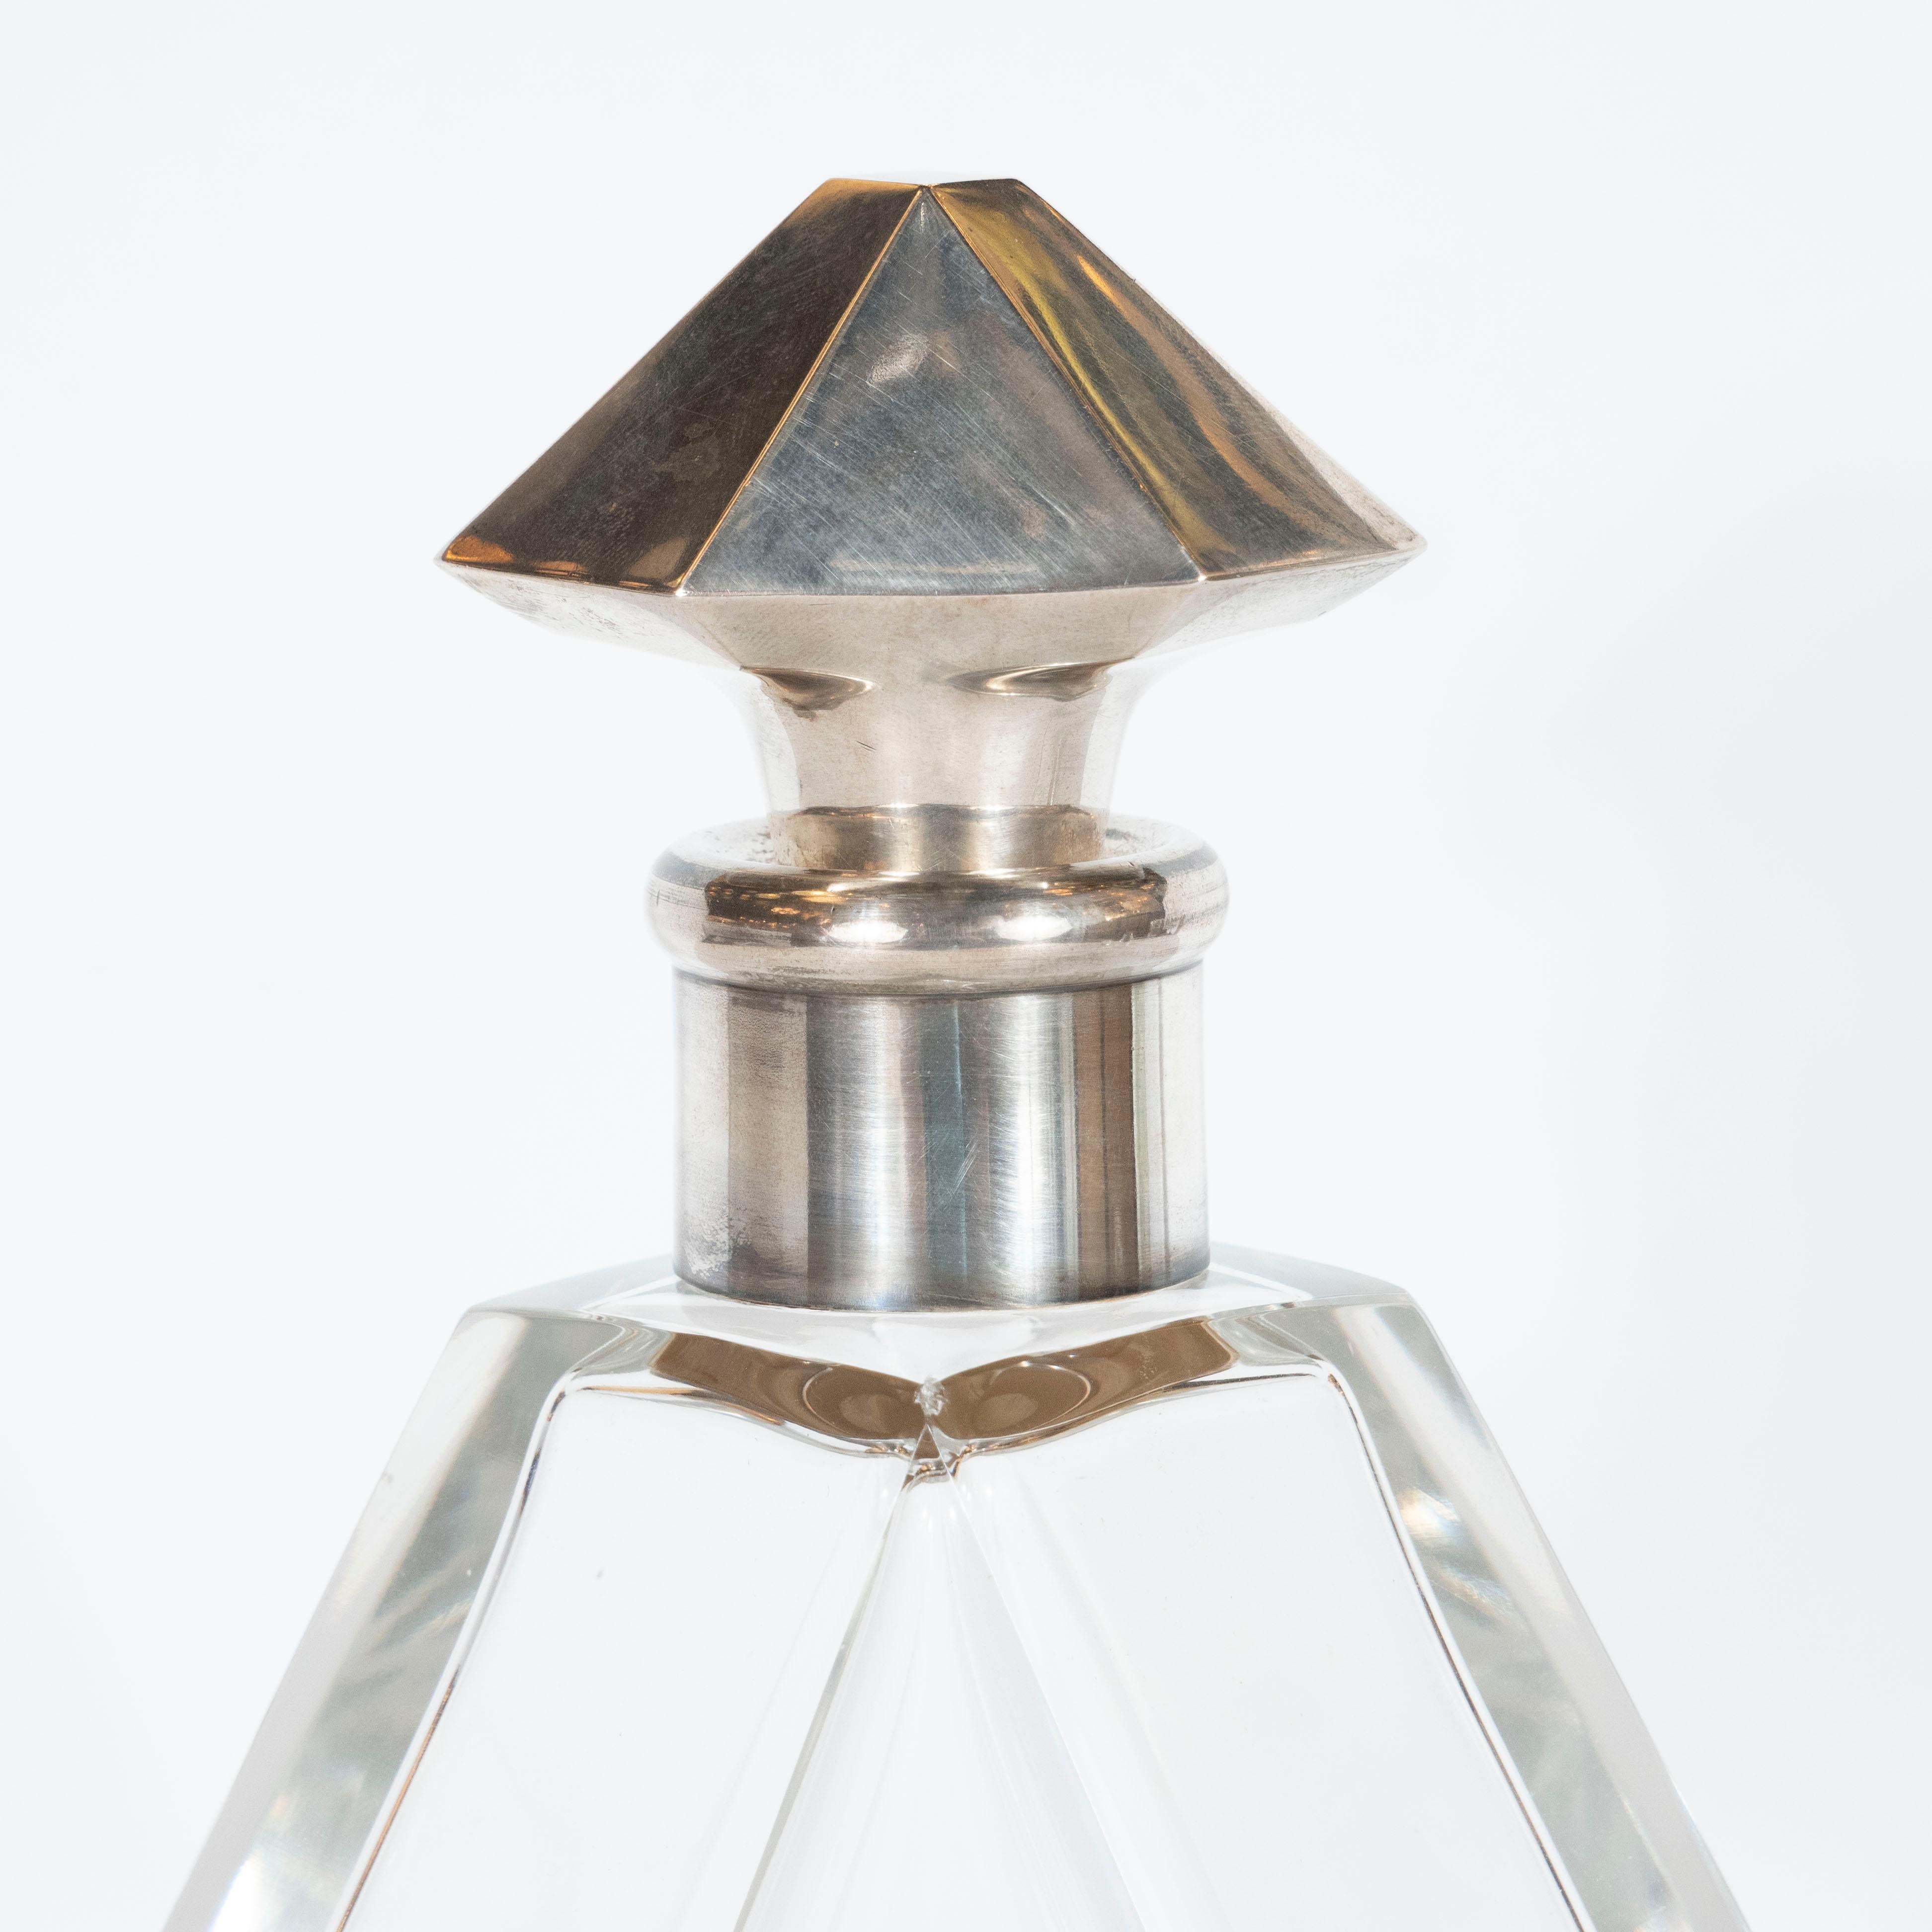 This elegant cubist crystal decanter was realized in France, circa 1935. It features a faceted and elongated hexagonal form that tapers to flat shoulders in a diamond shape at its apex from its widest point near the bottom. A cylindrical neck, in